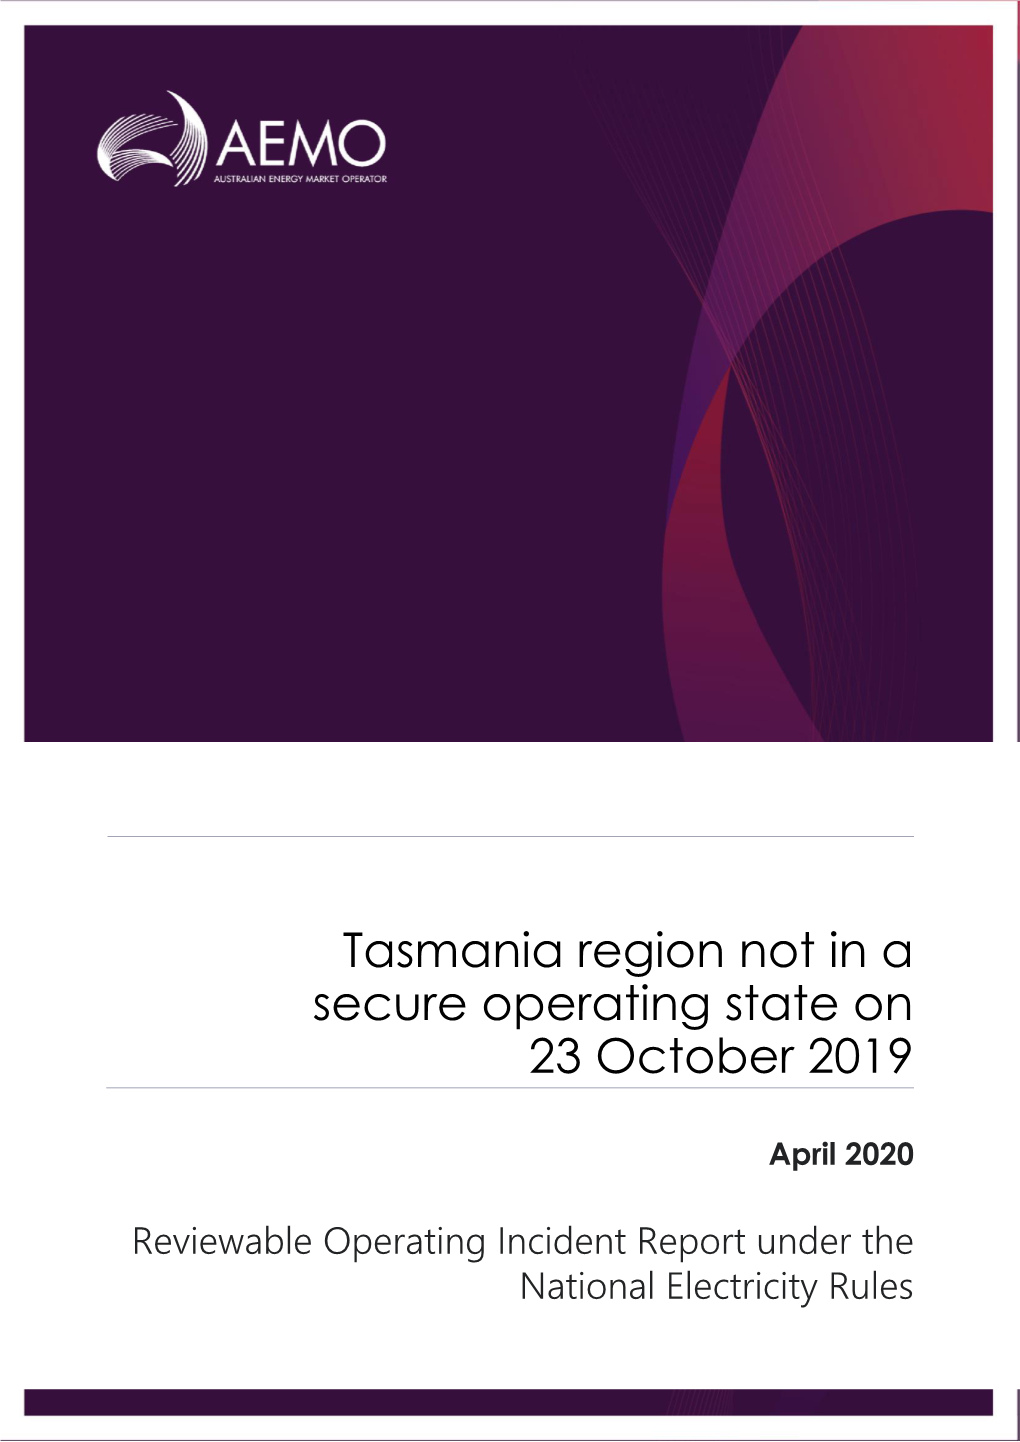 Tasmania Region Not in a Secure Operating State on 23 October 2019